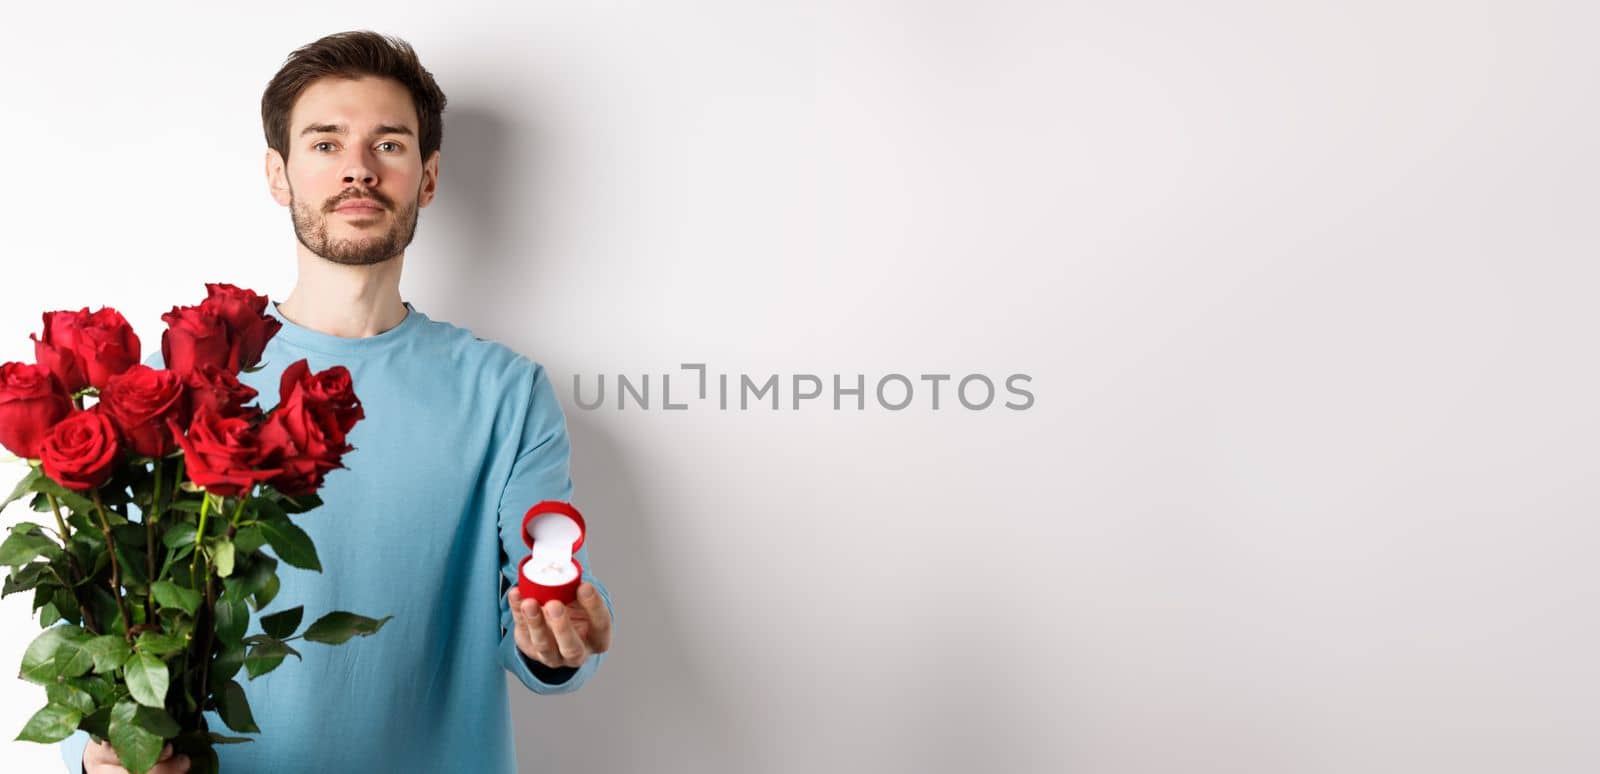 Valentines and relationship. Romantic man boyfriend holding red roses and showing engagement ring, making a proposal on lovers day, standing over white background.